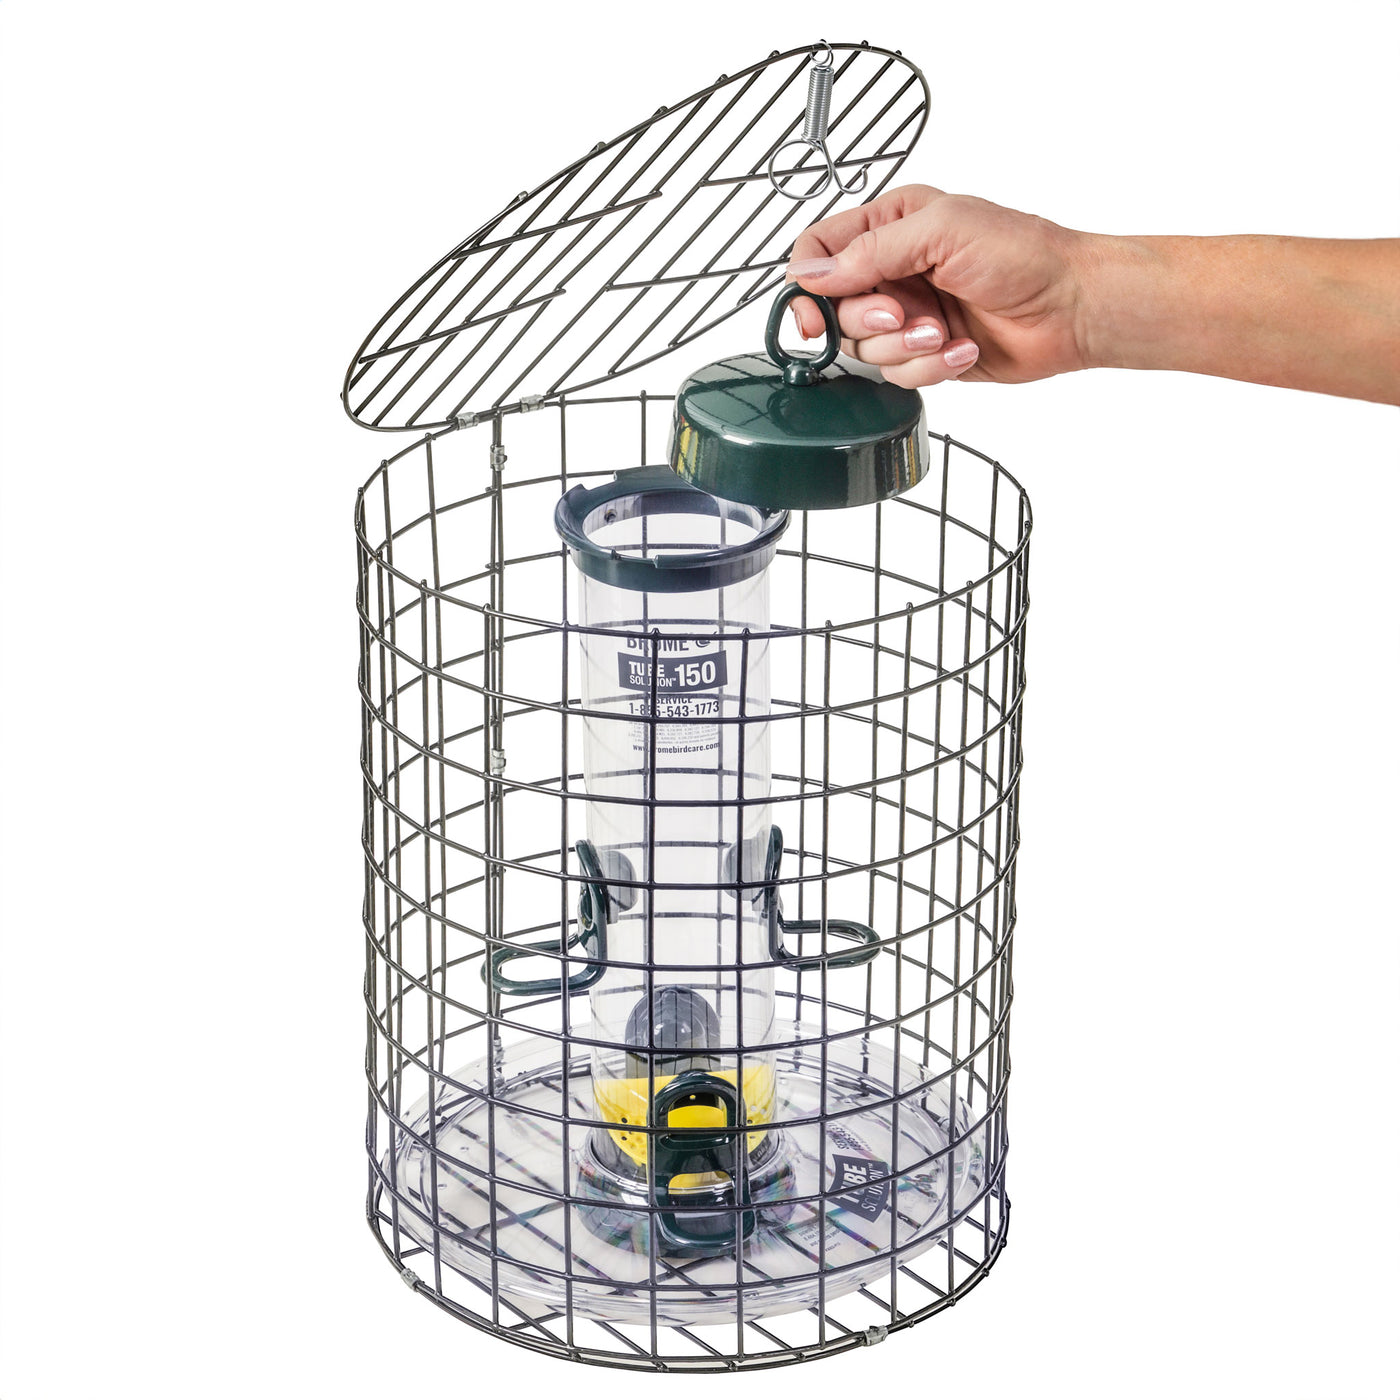 Brome 150 Tube Feeder with Squirrel-Proof Cage - Birds Choice